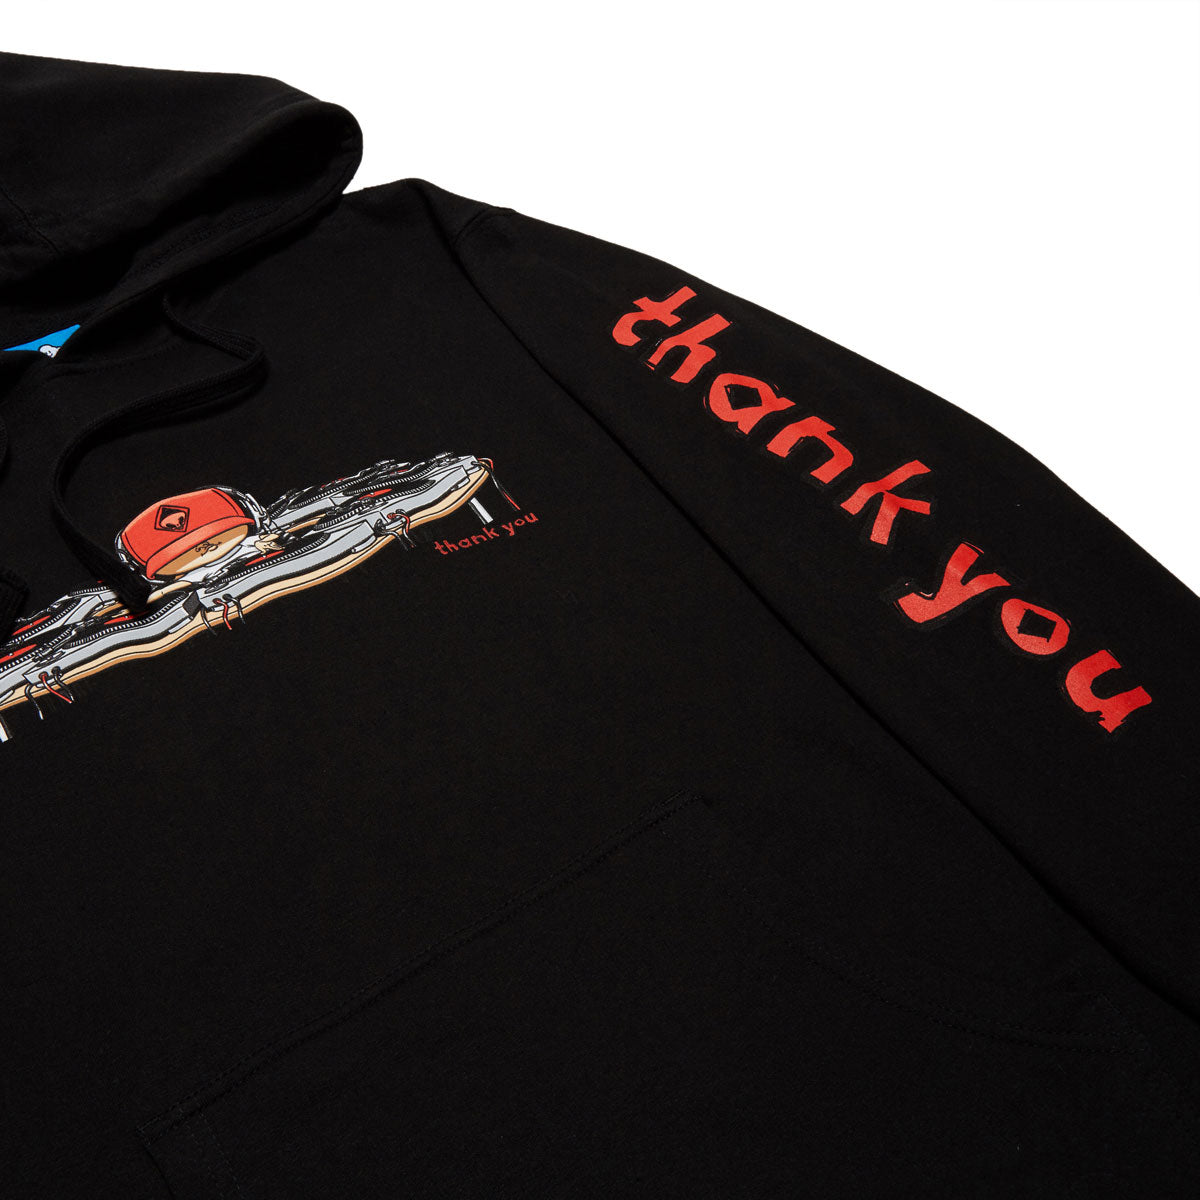 Thank You x Ronnie Creager Mix Master Hoodie - Black image 2